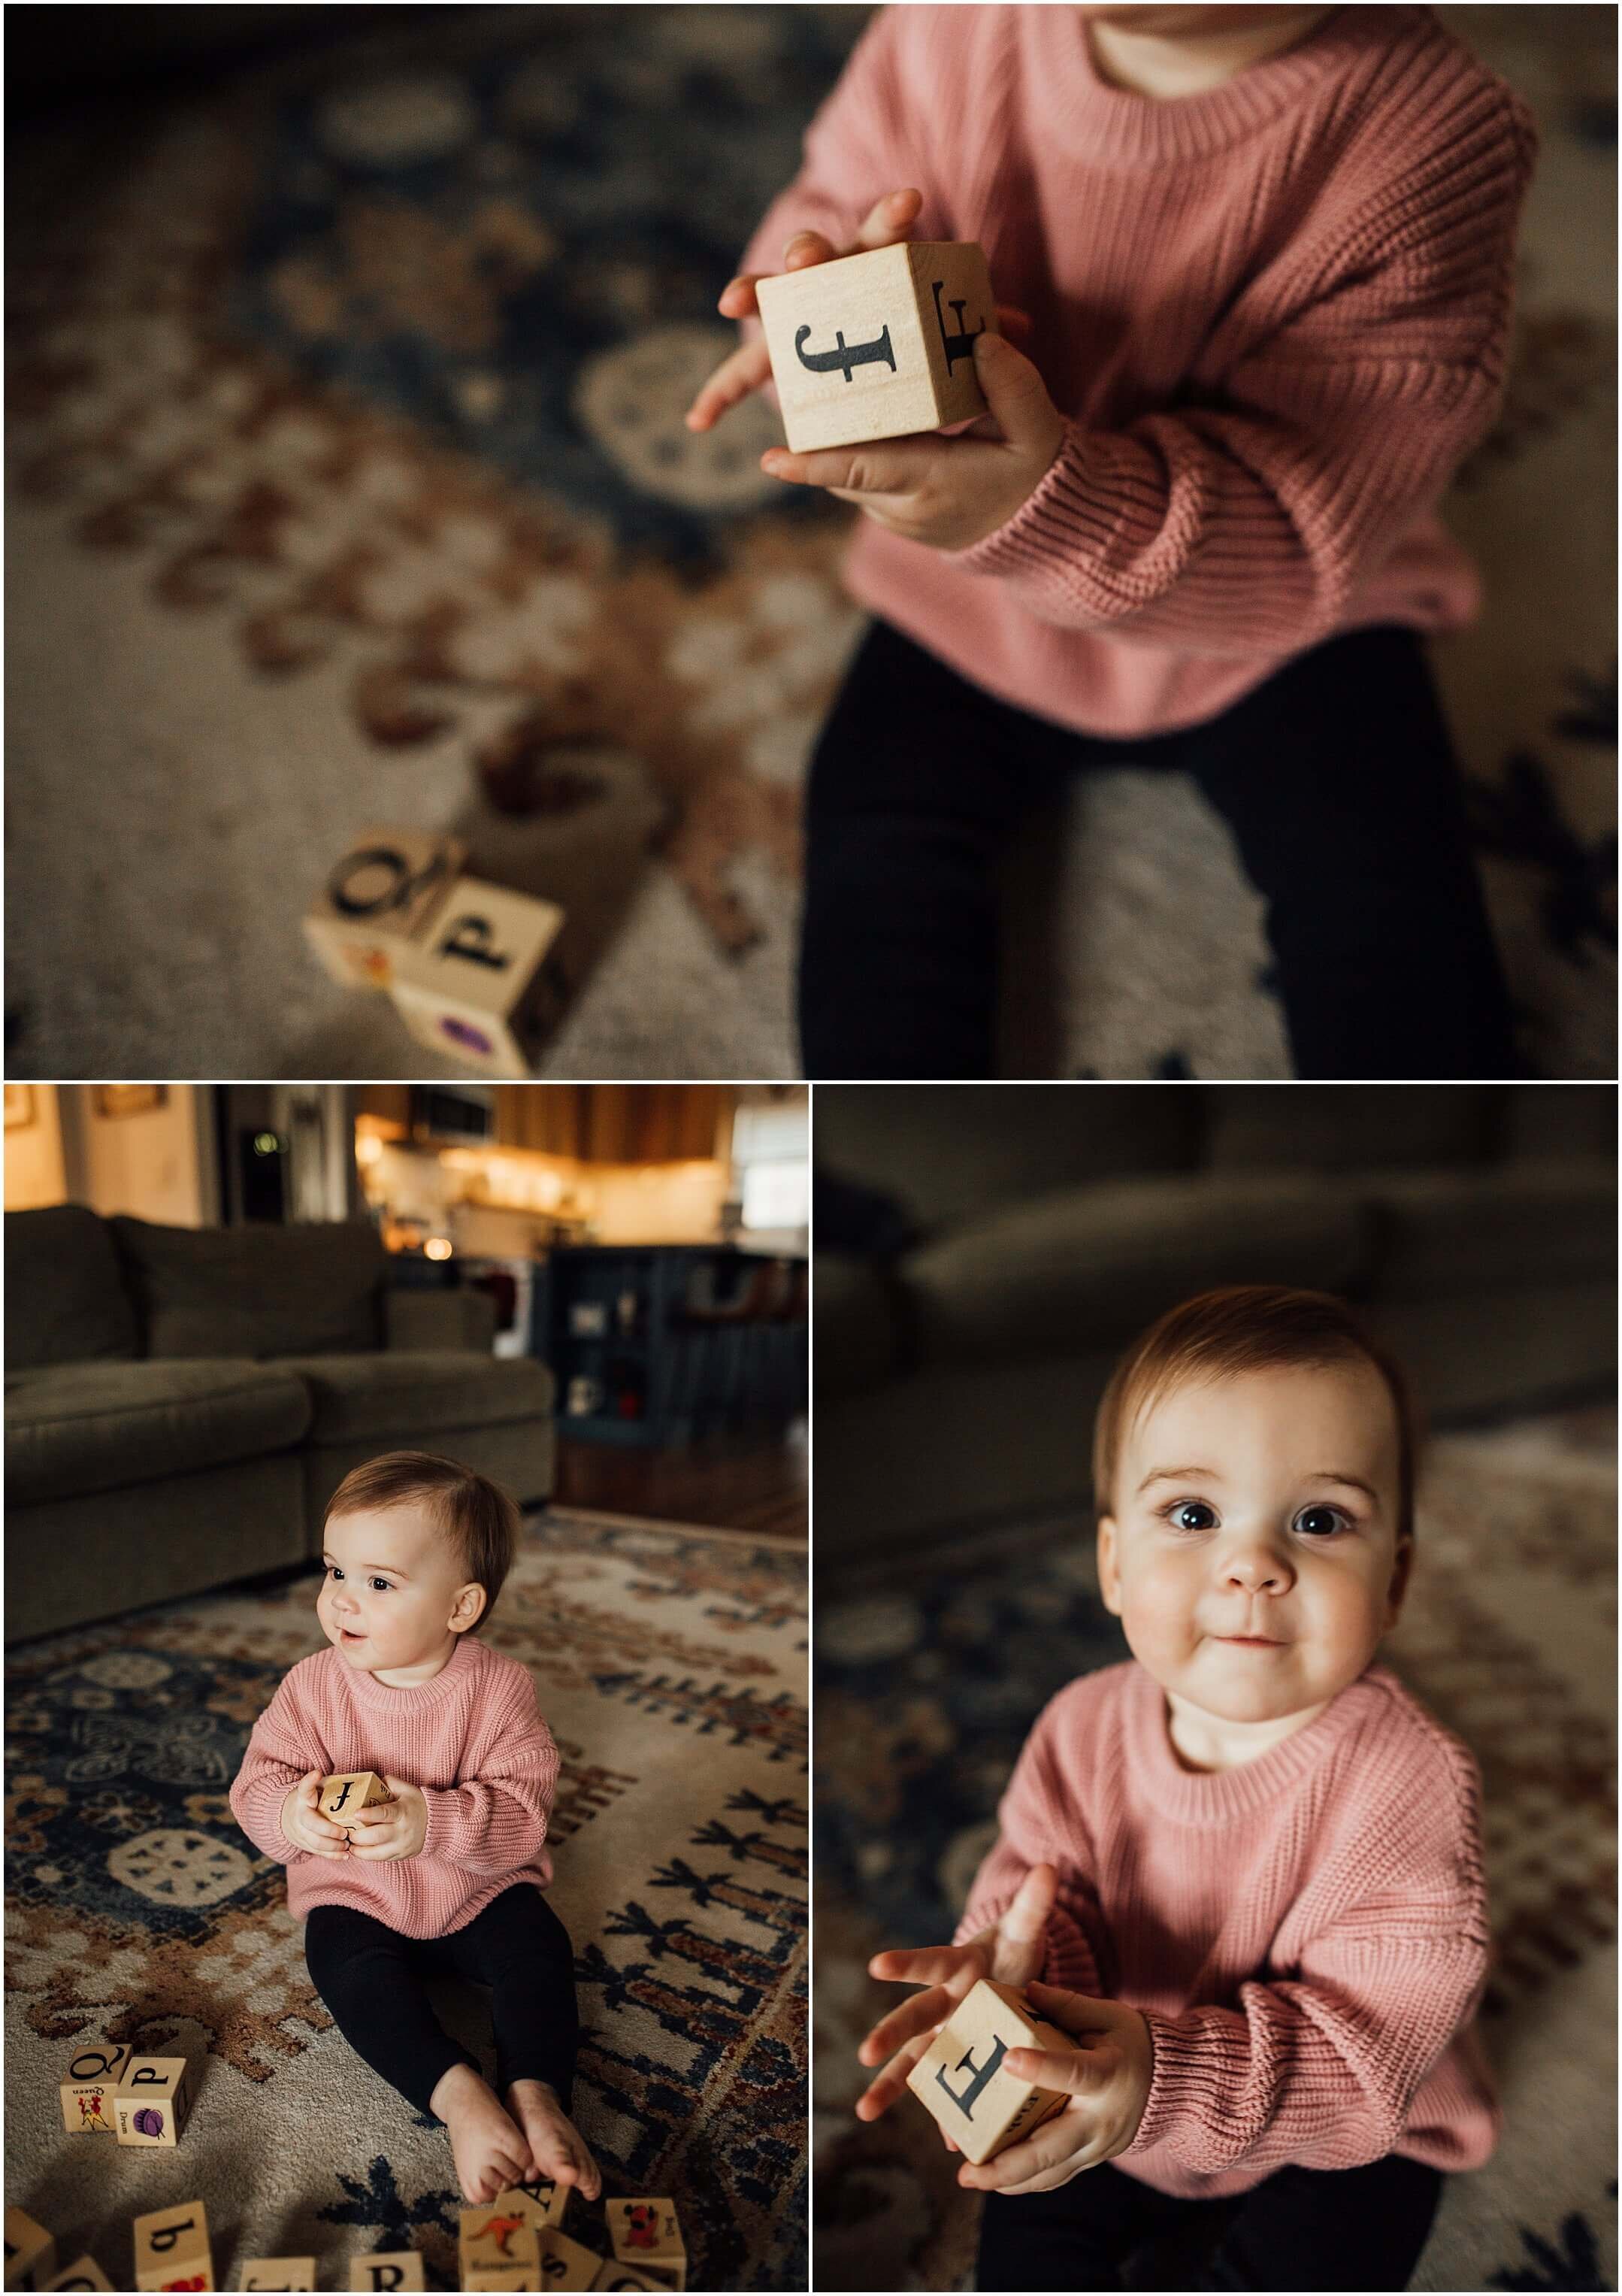 one year old | child photography | home photography sessions | lifestyle photography| kelly lovan photography